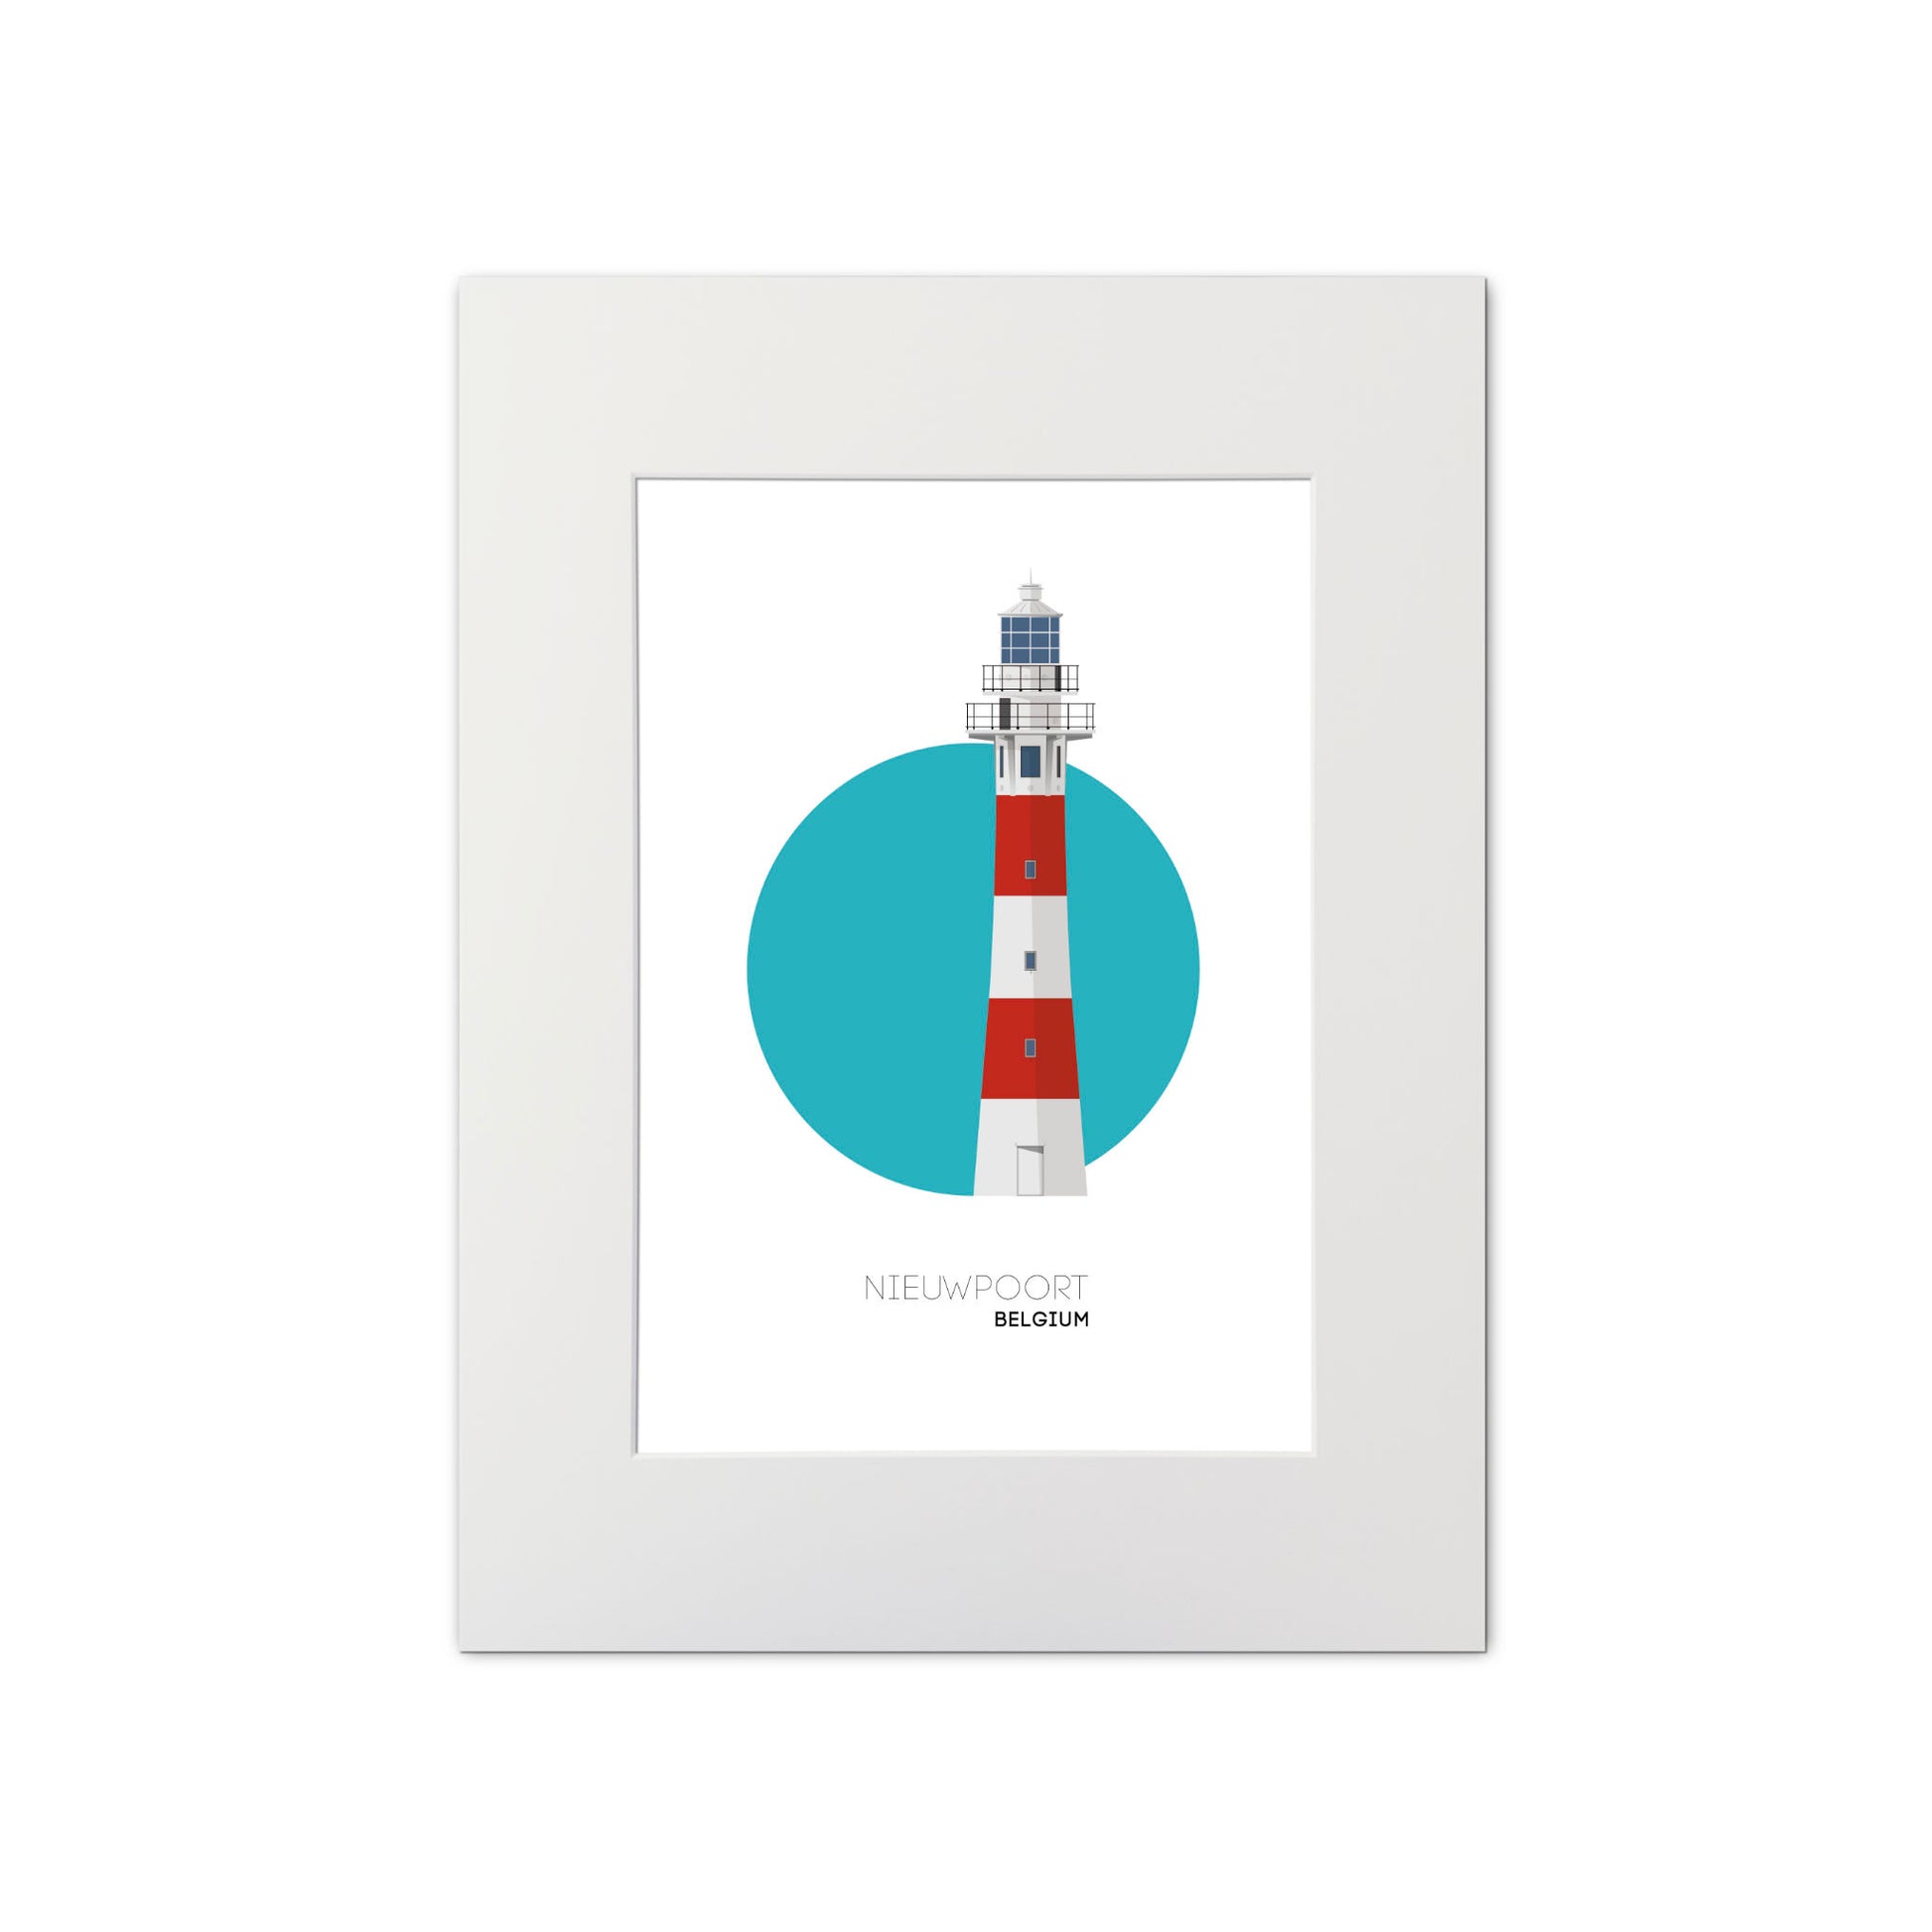 Illustration of the Nieuwpoort lighthouse, Belgium. On a white background with aqua blue circle as a backdrop, mounted and measuring 30x40cm.